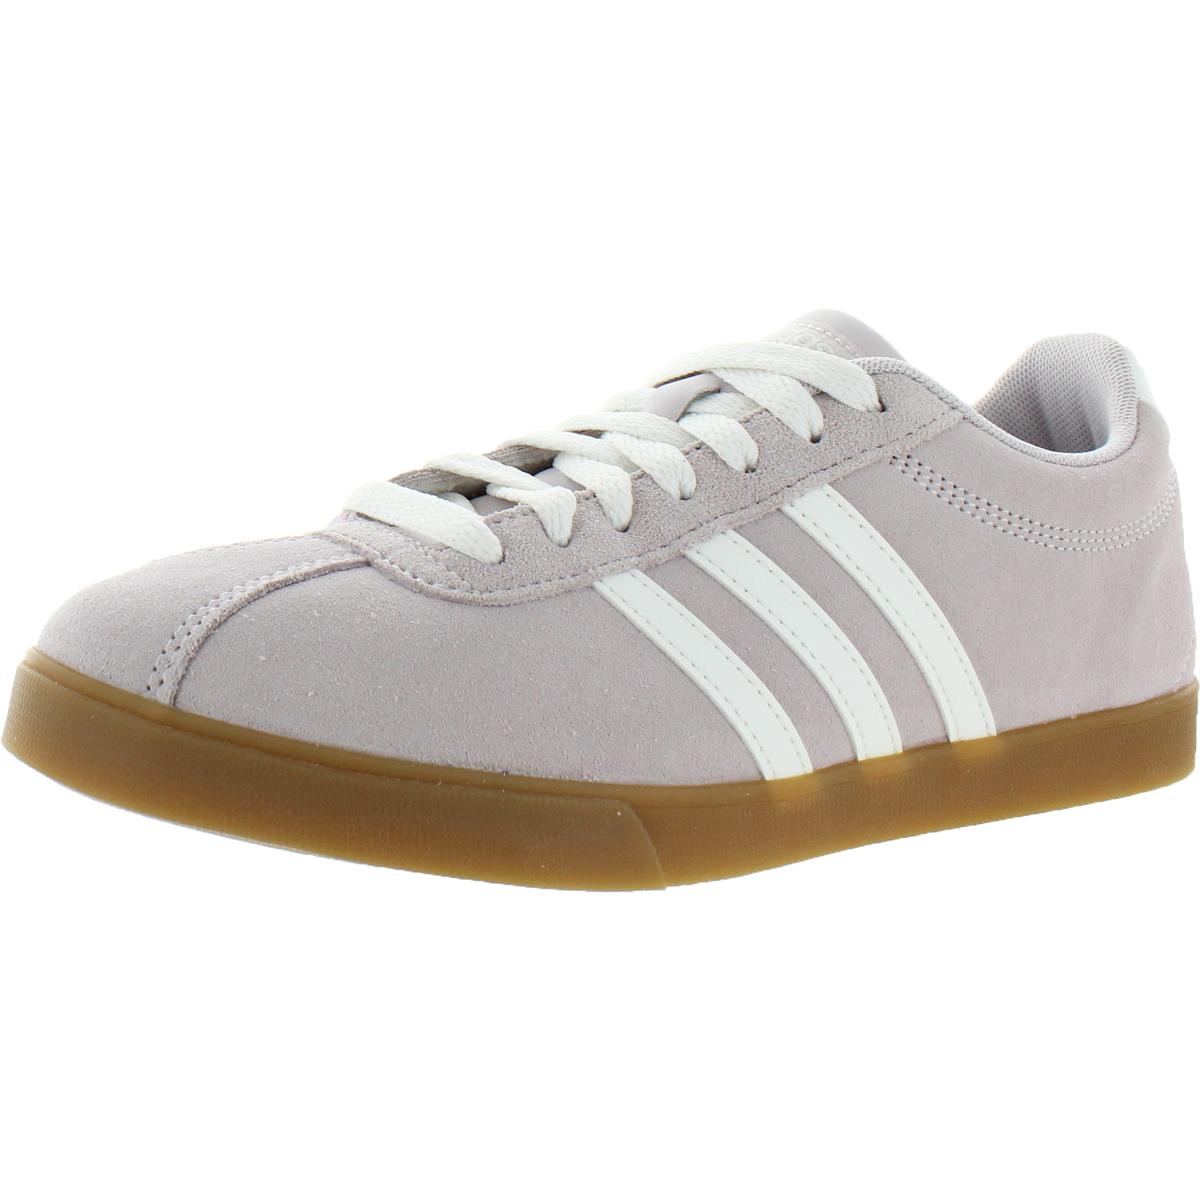 Adidas Womens Courtset Suede Ortholite Float Trainer Sneakers Shoes ...